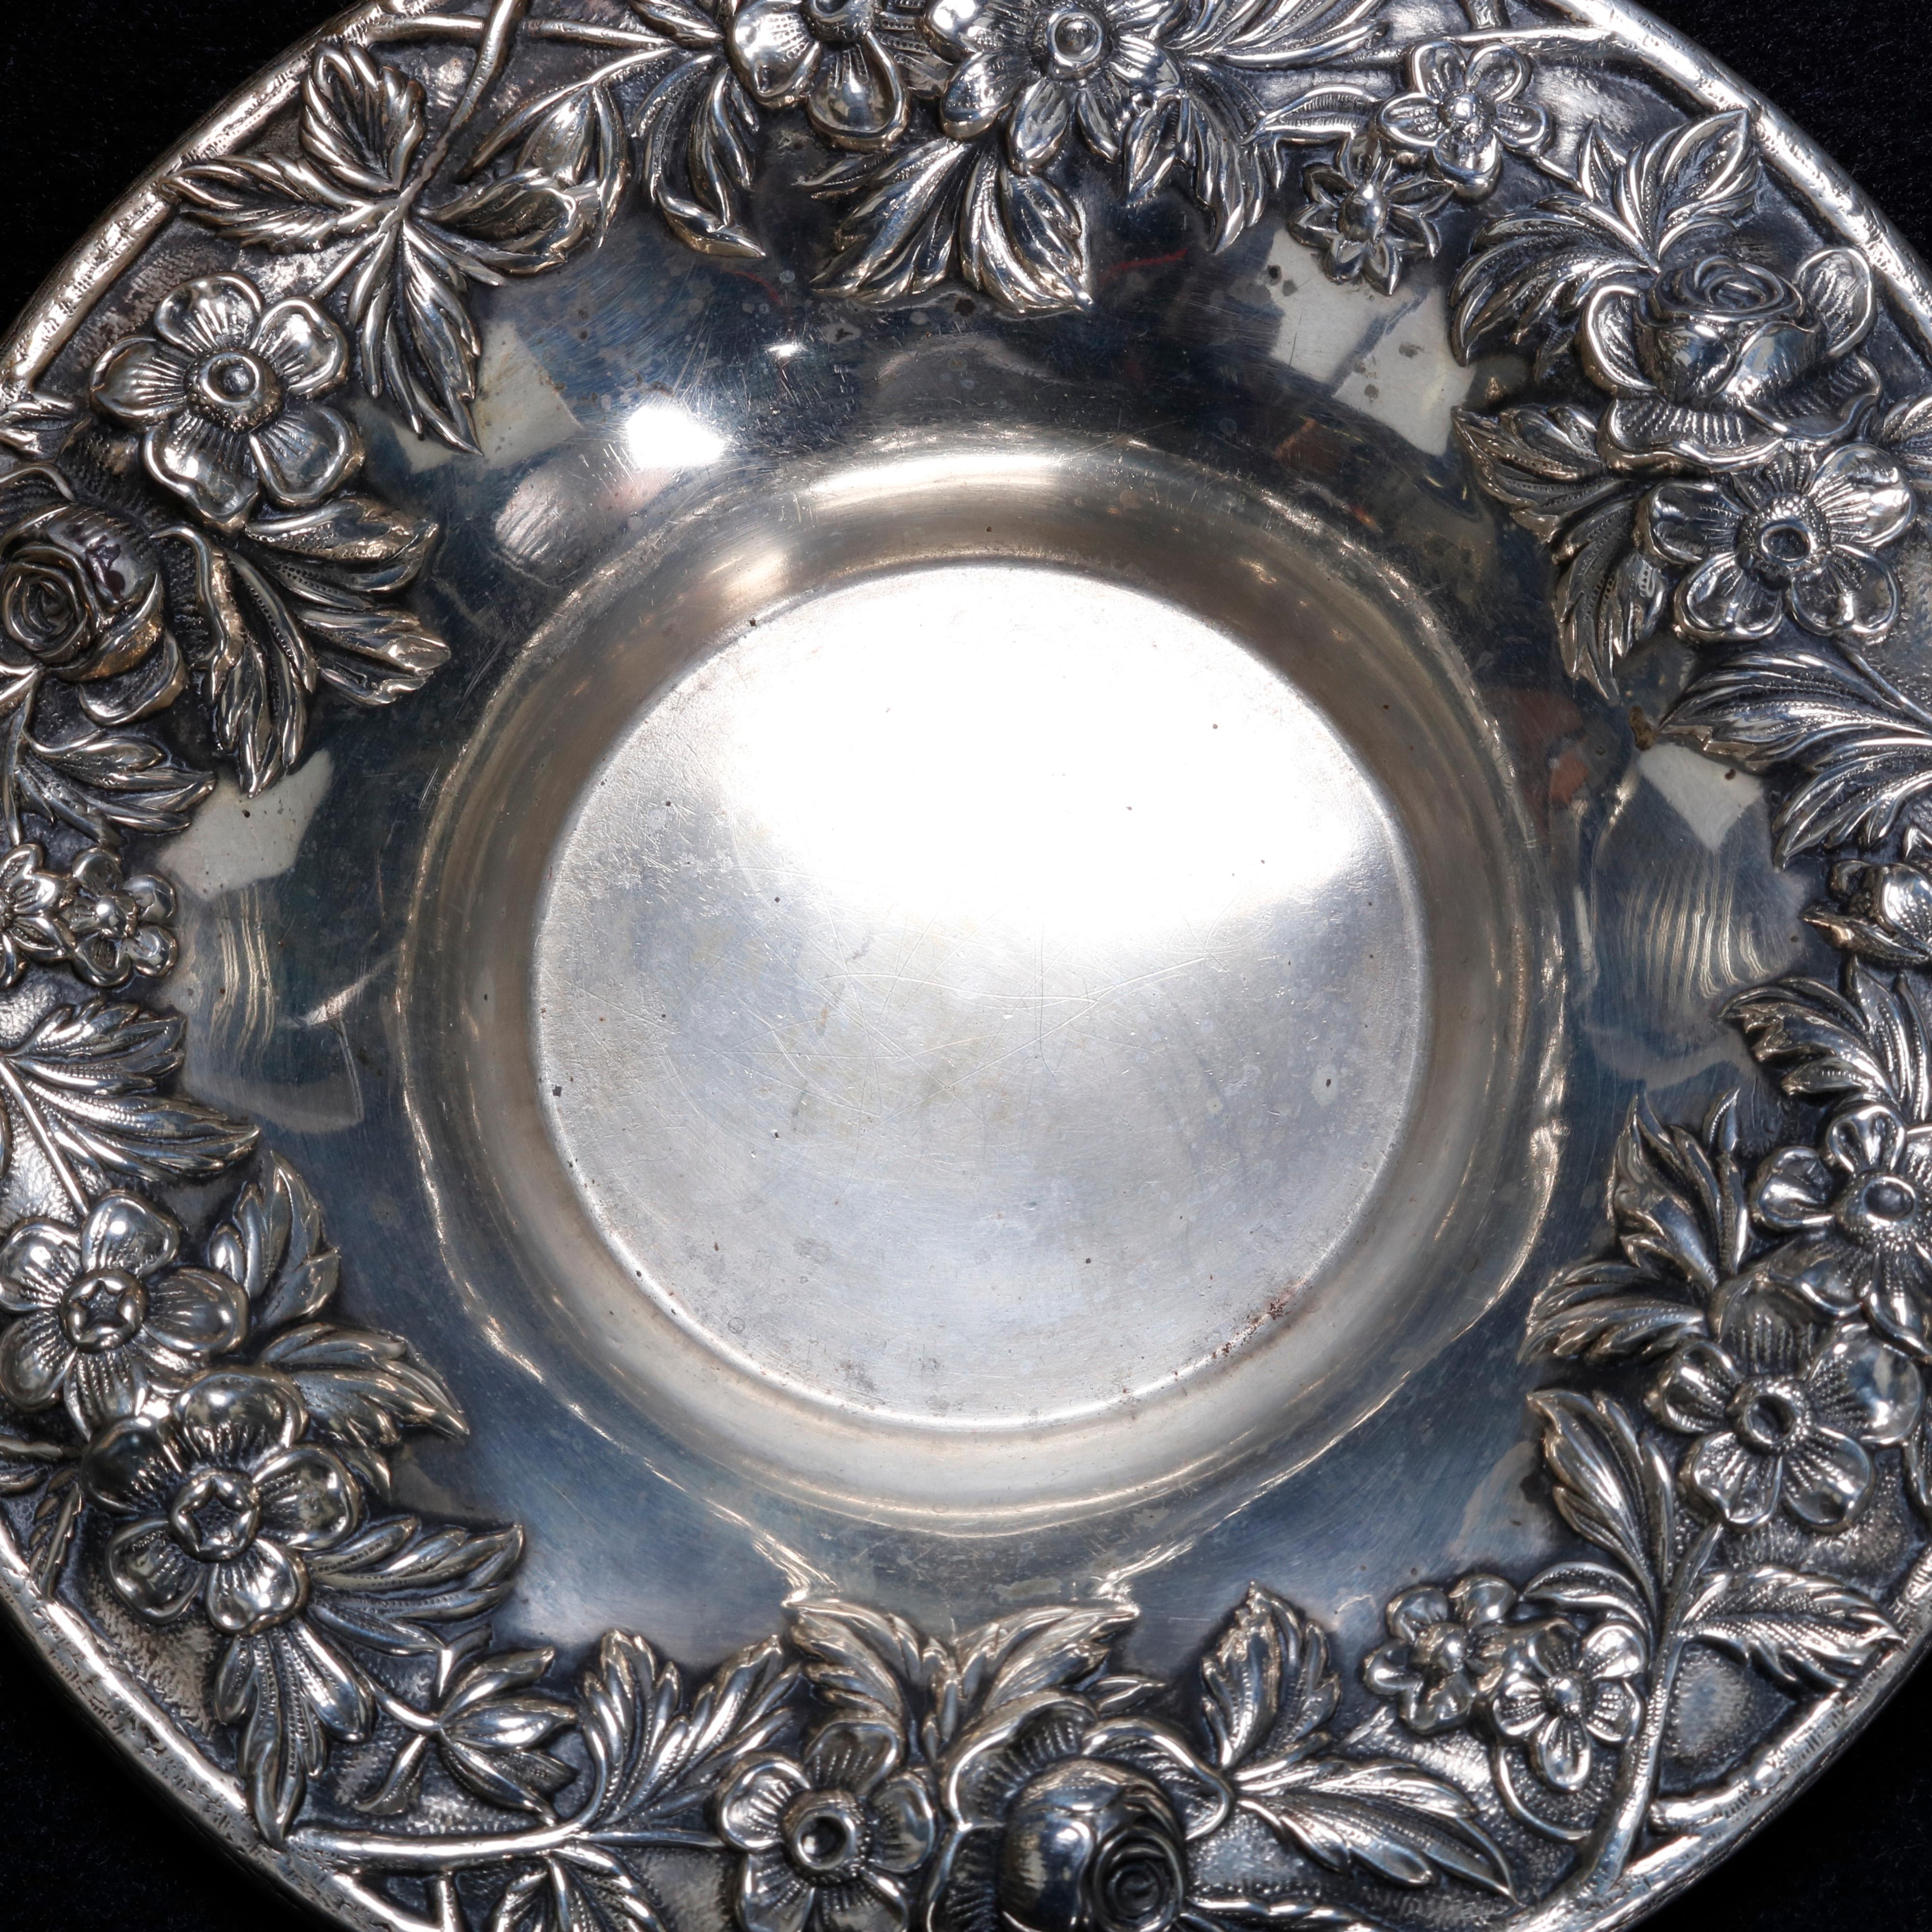 An antique S. Kirk & Sons nut bowl offers floral repousse rim, en verso stamped as photographed, circa 1890

Measures: 1.25